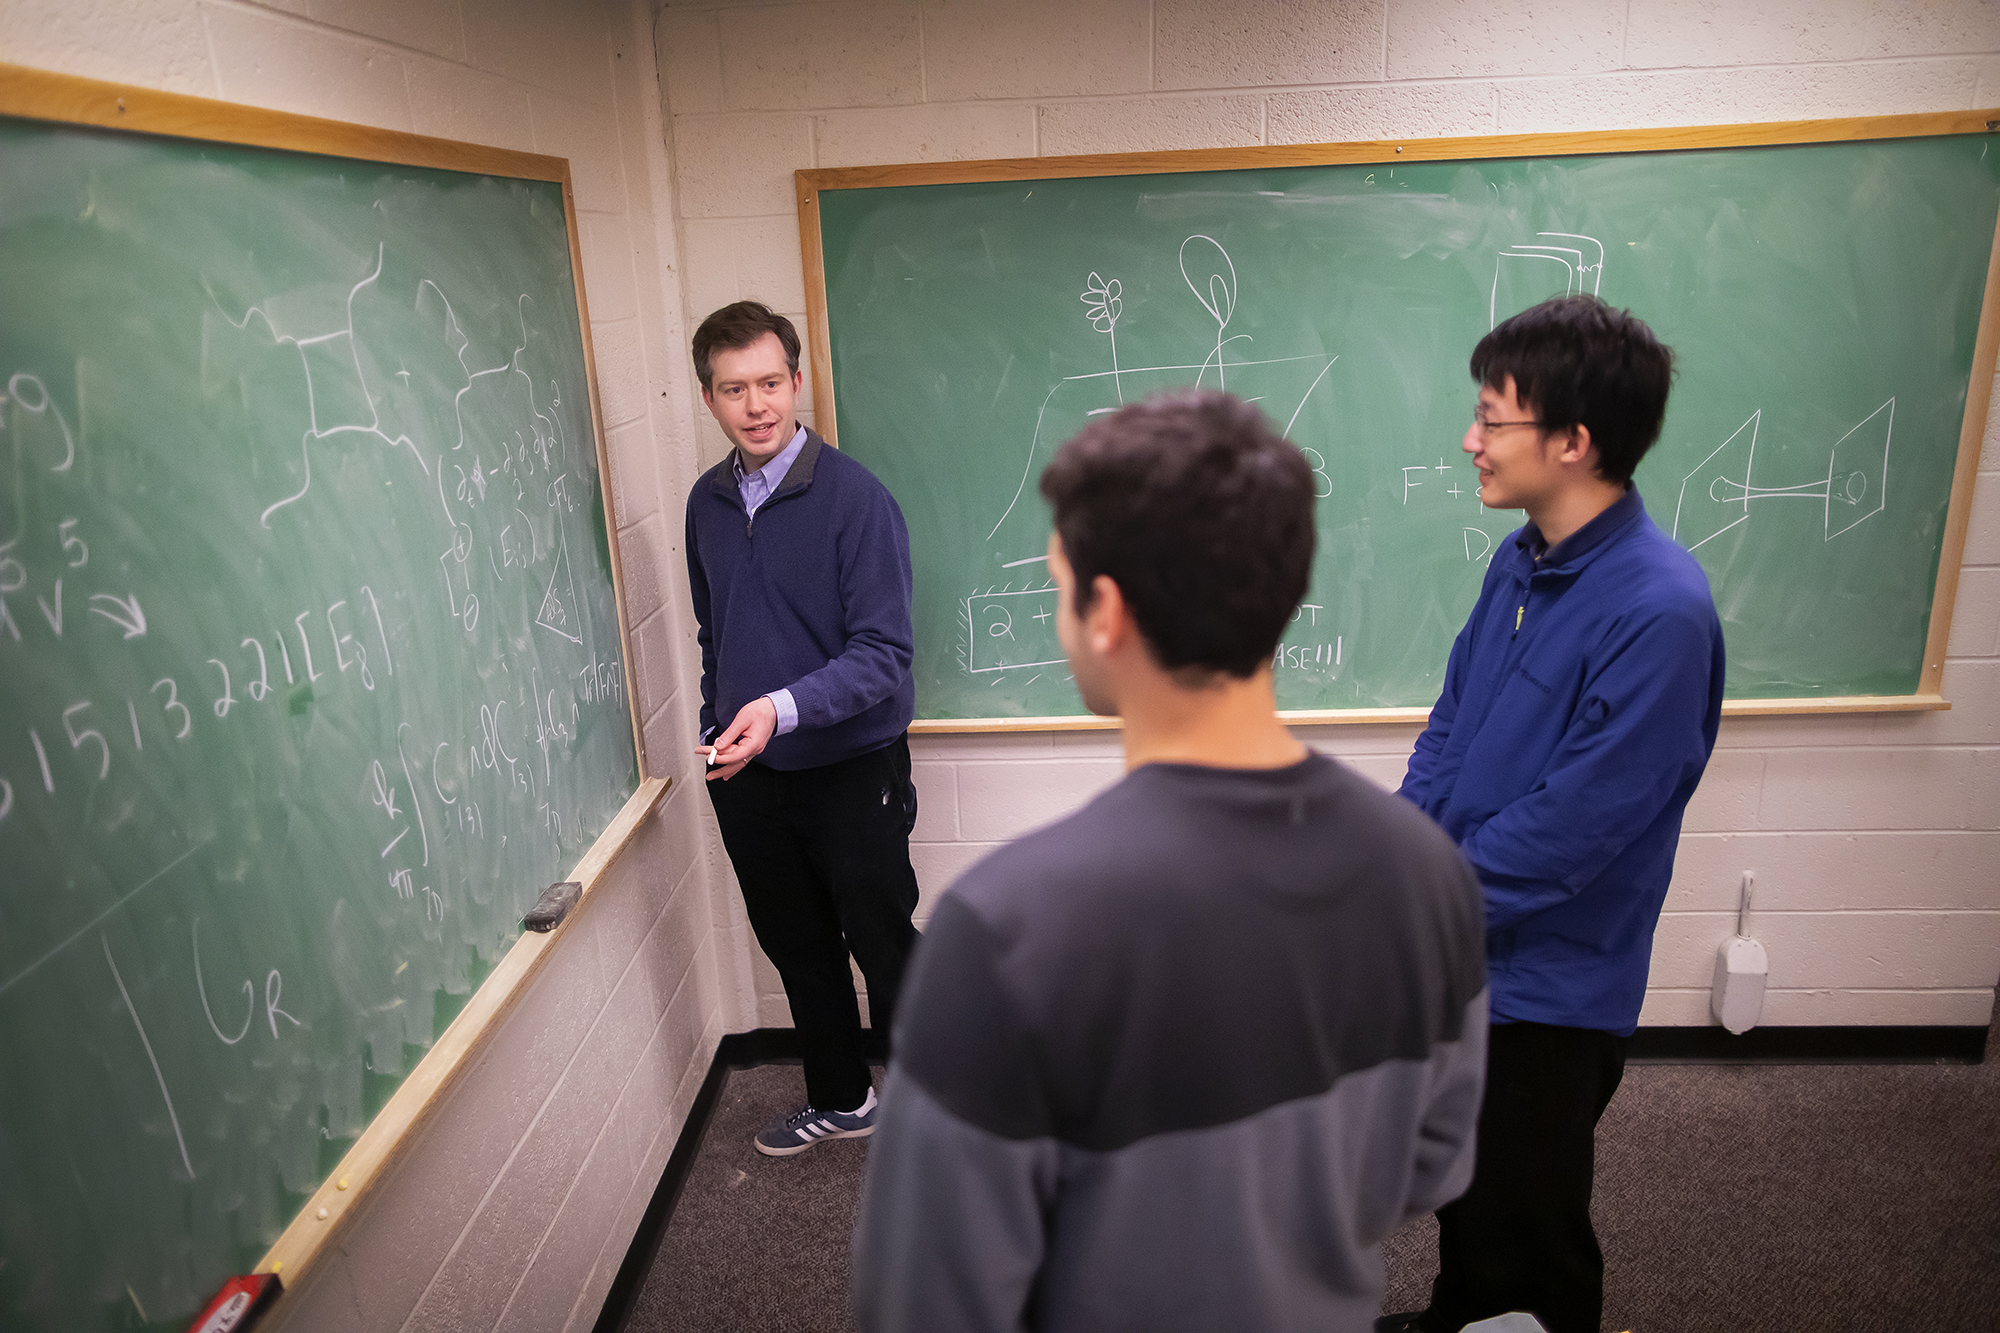 three people standing in the center of two chalkboards with one person standing at the board covered in equations with a piece of chalk in their hand